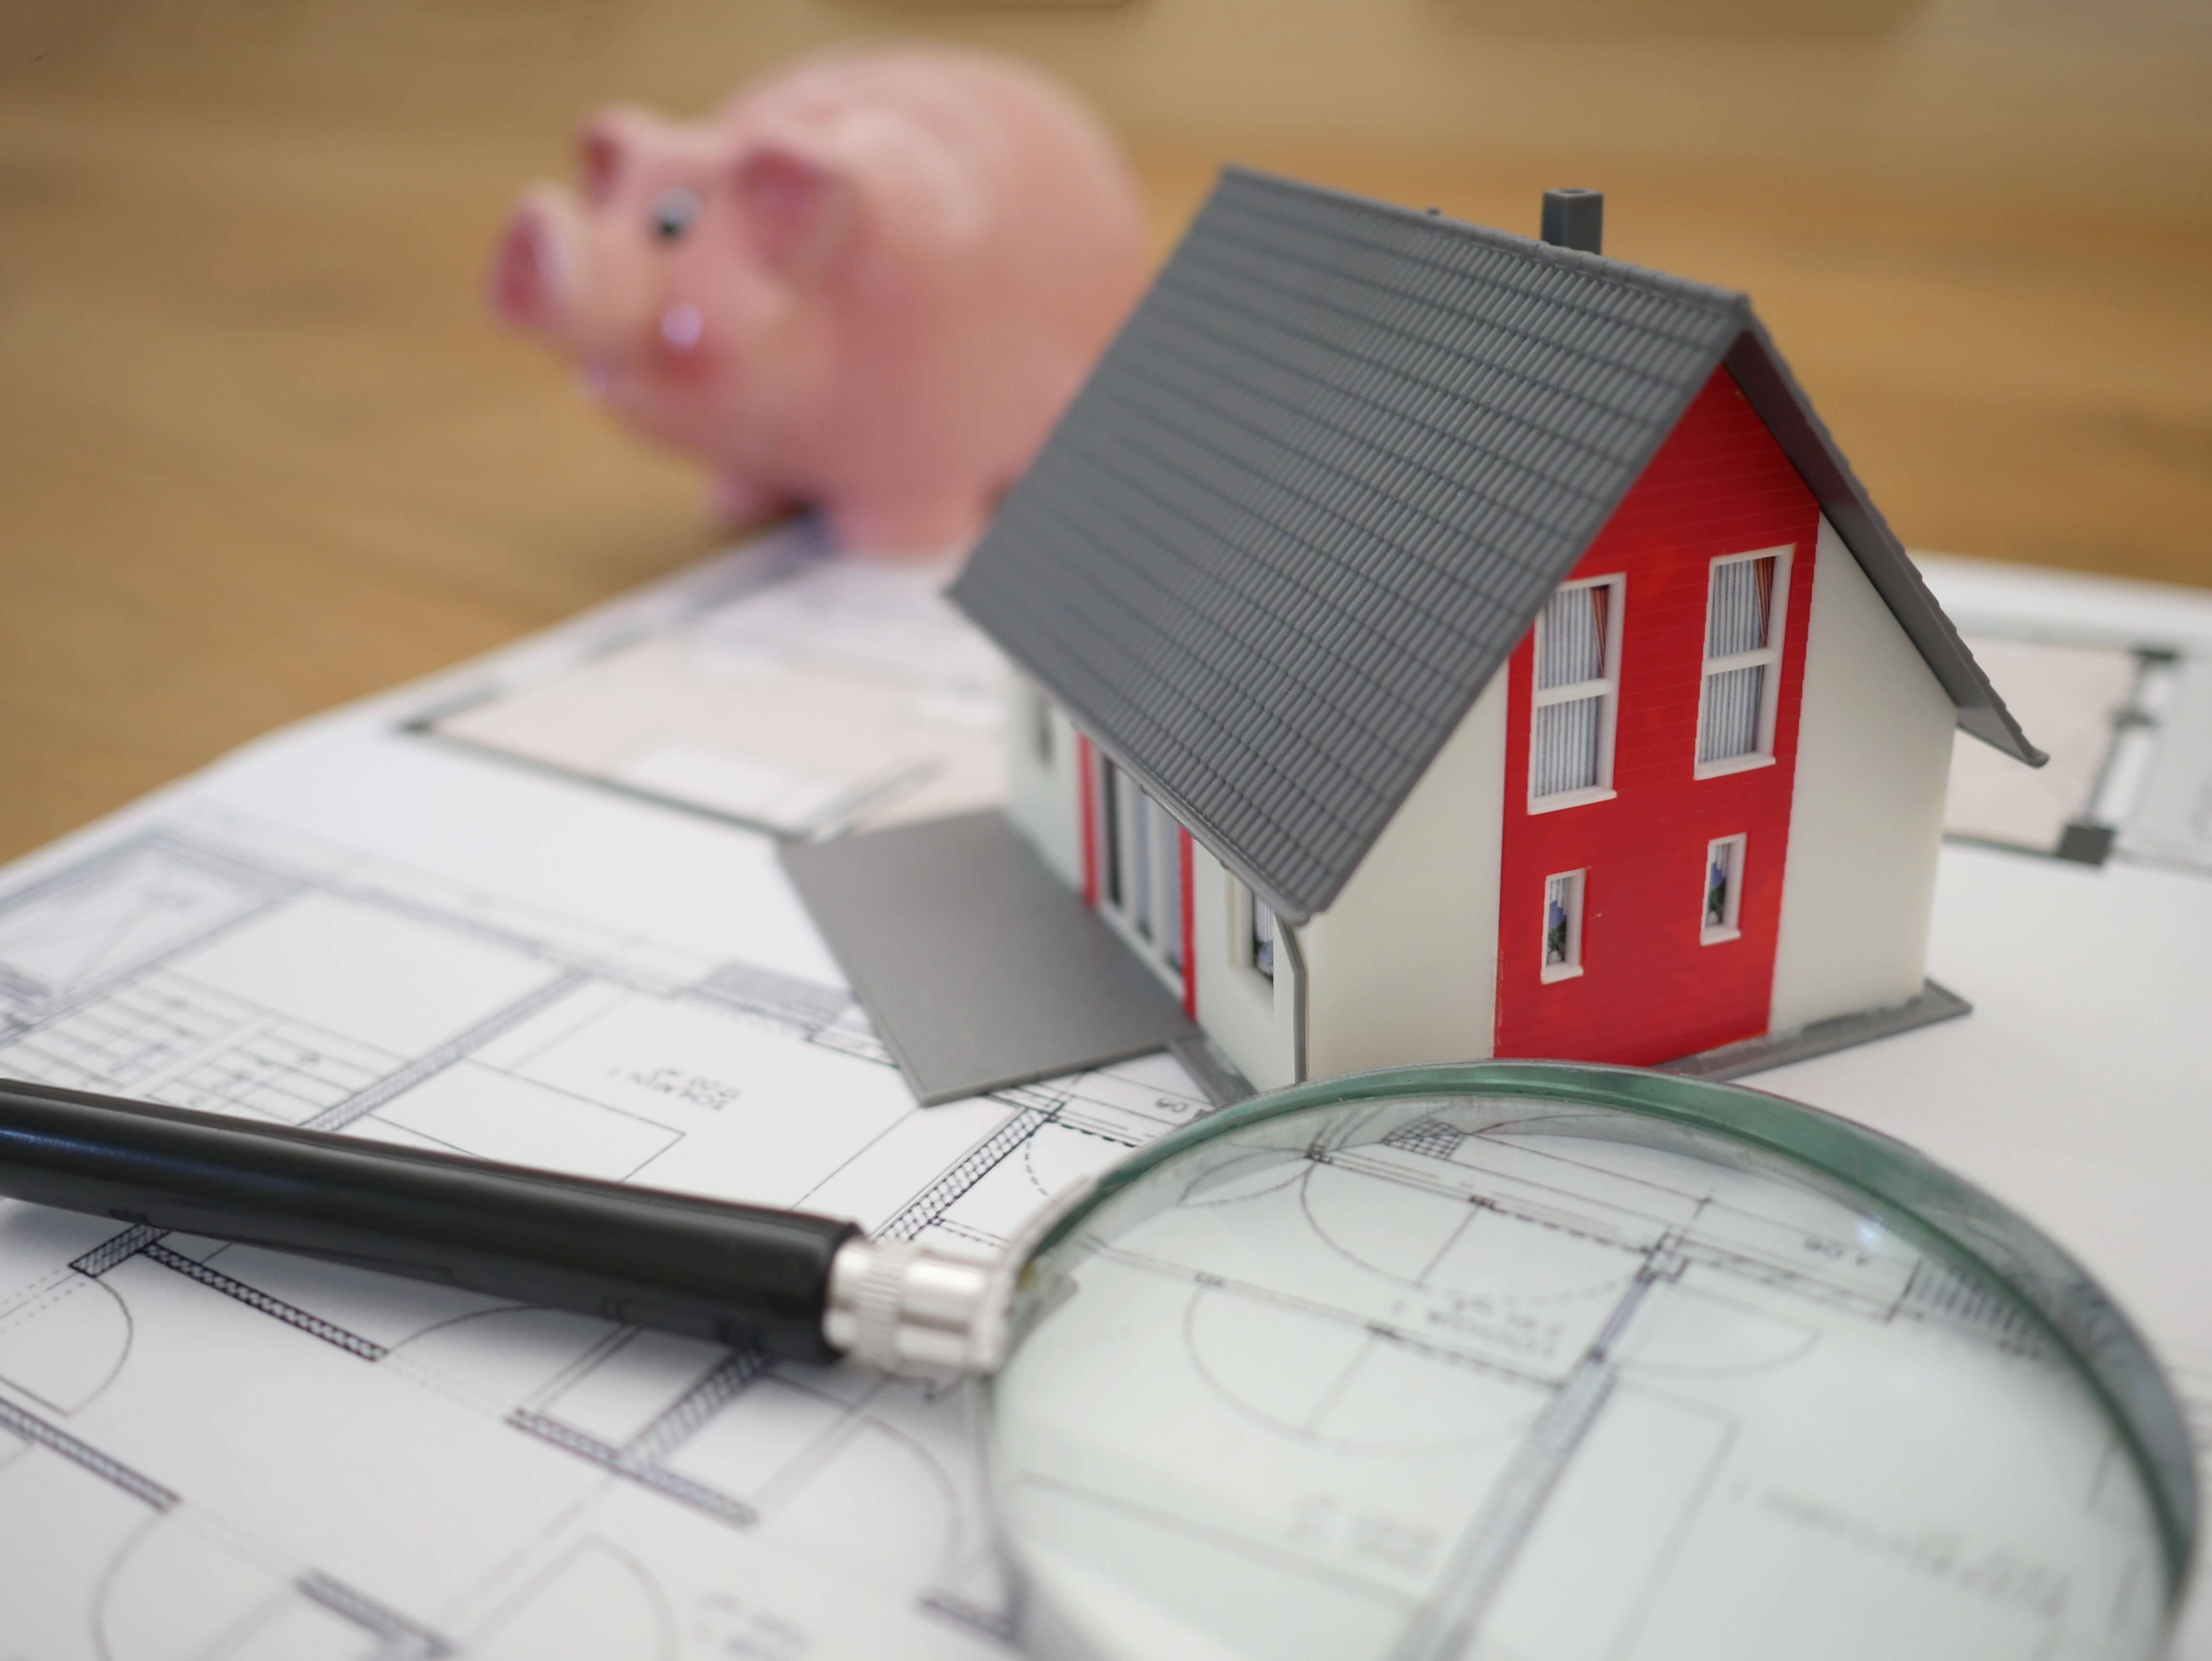 A floor plan with a magnifying glass, toy house and piggy bank placed on top